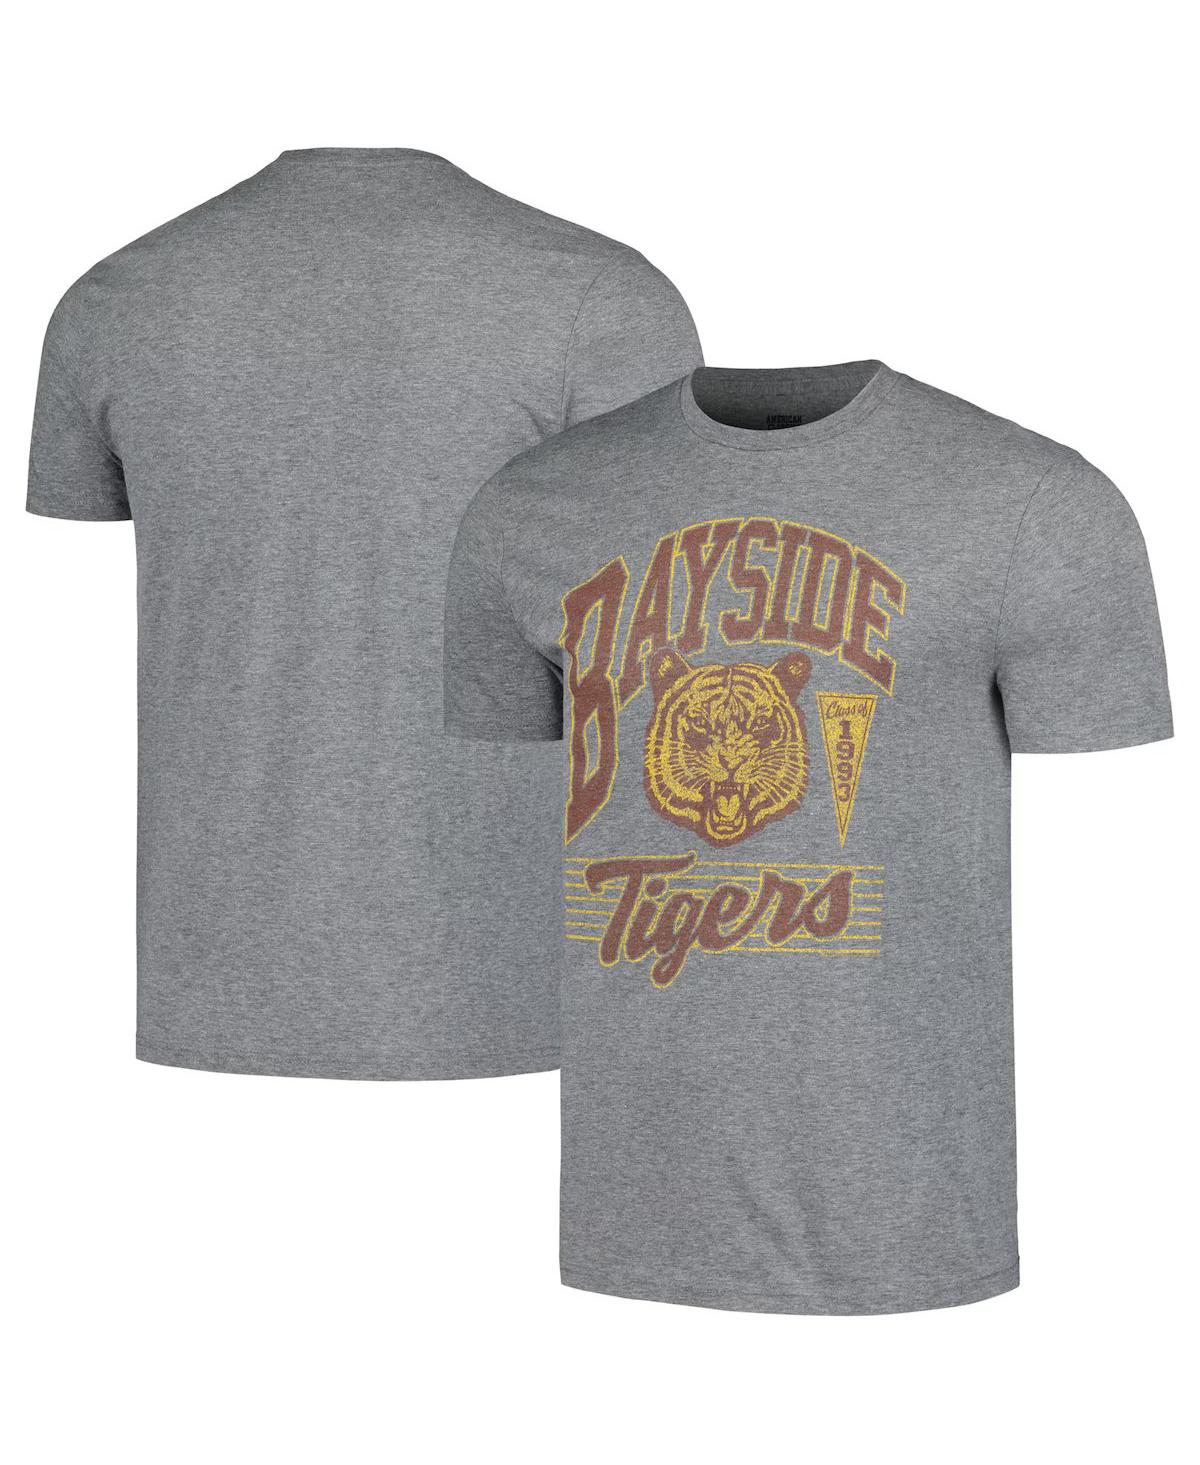 Men's & Women's Heather Charcoal Saved by the Bell Bayside Tigers Graphic T-Shirt - Heather Charcoal